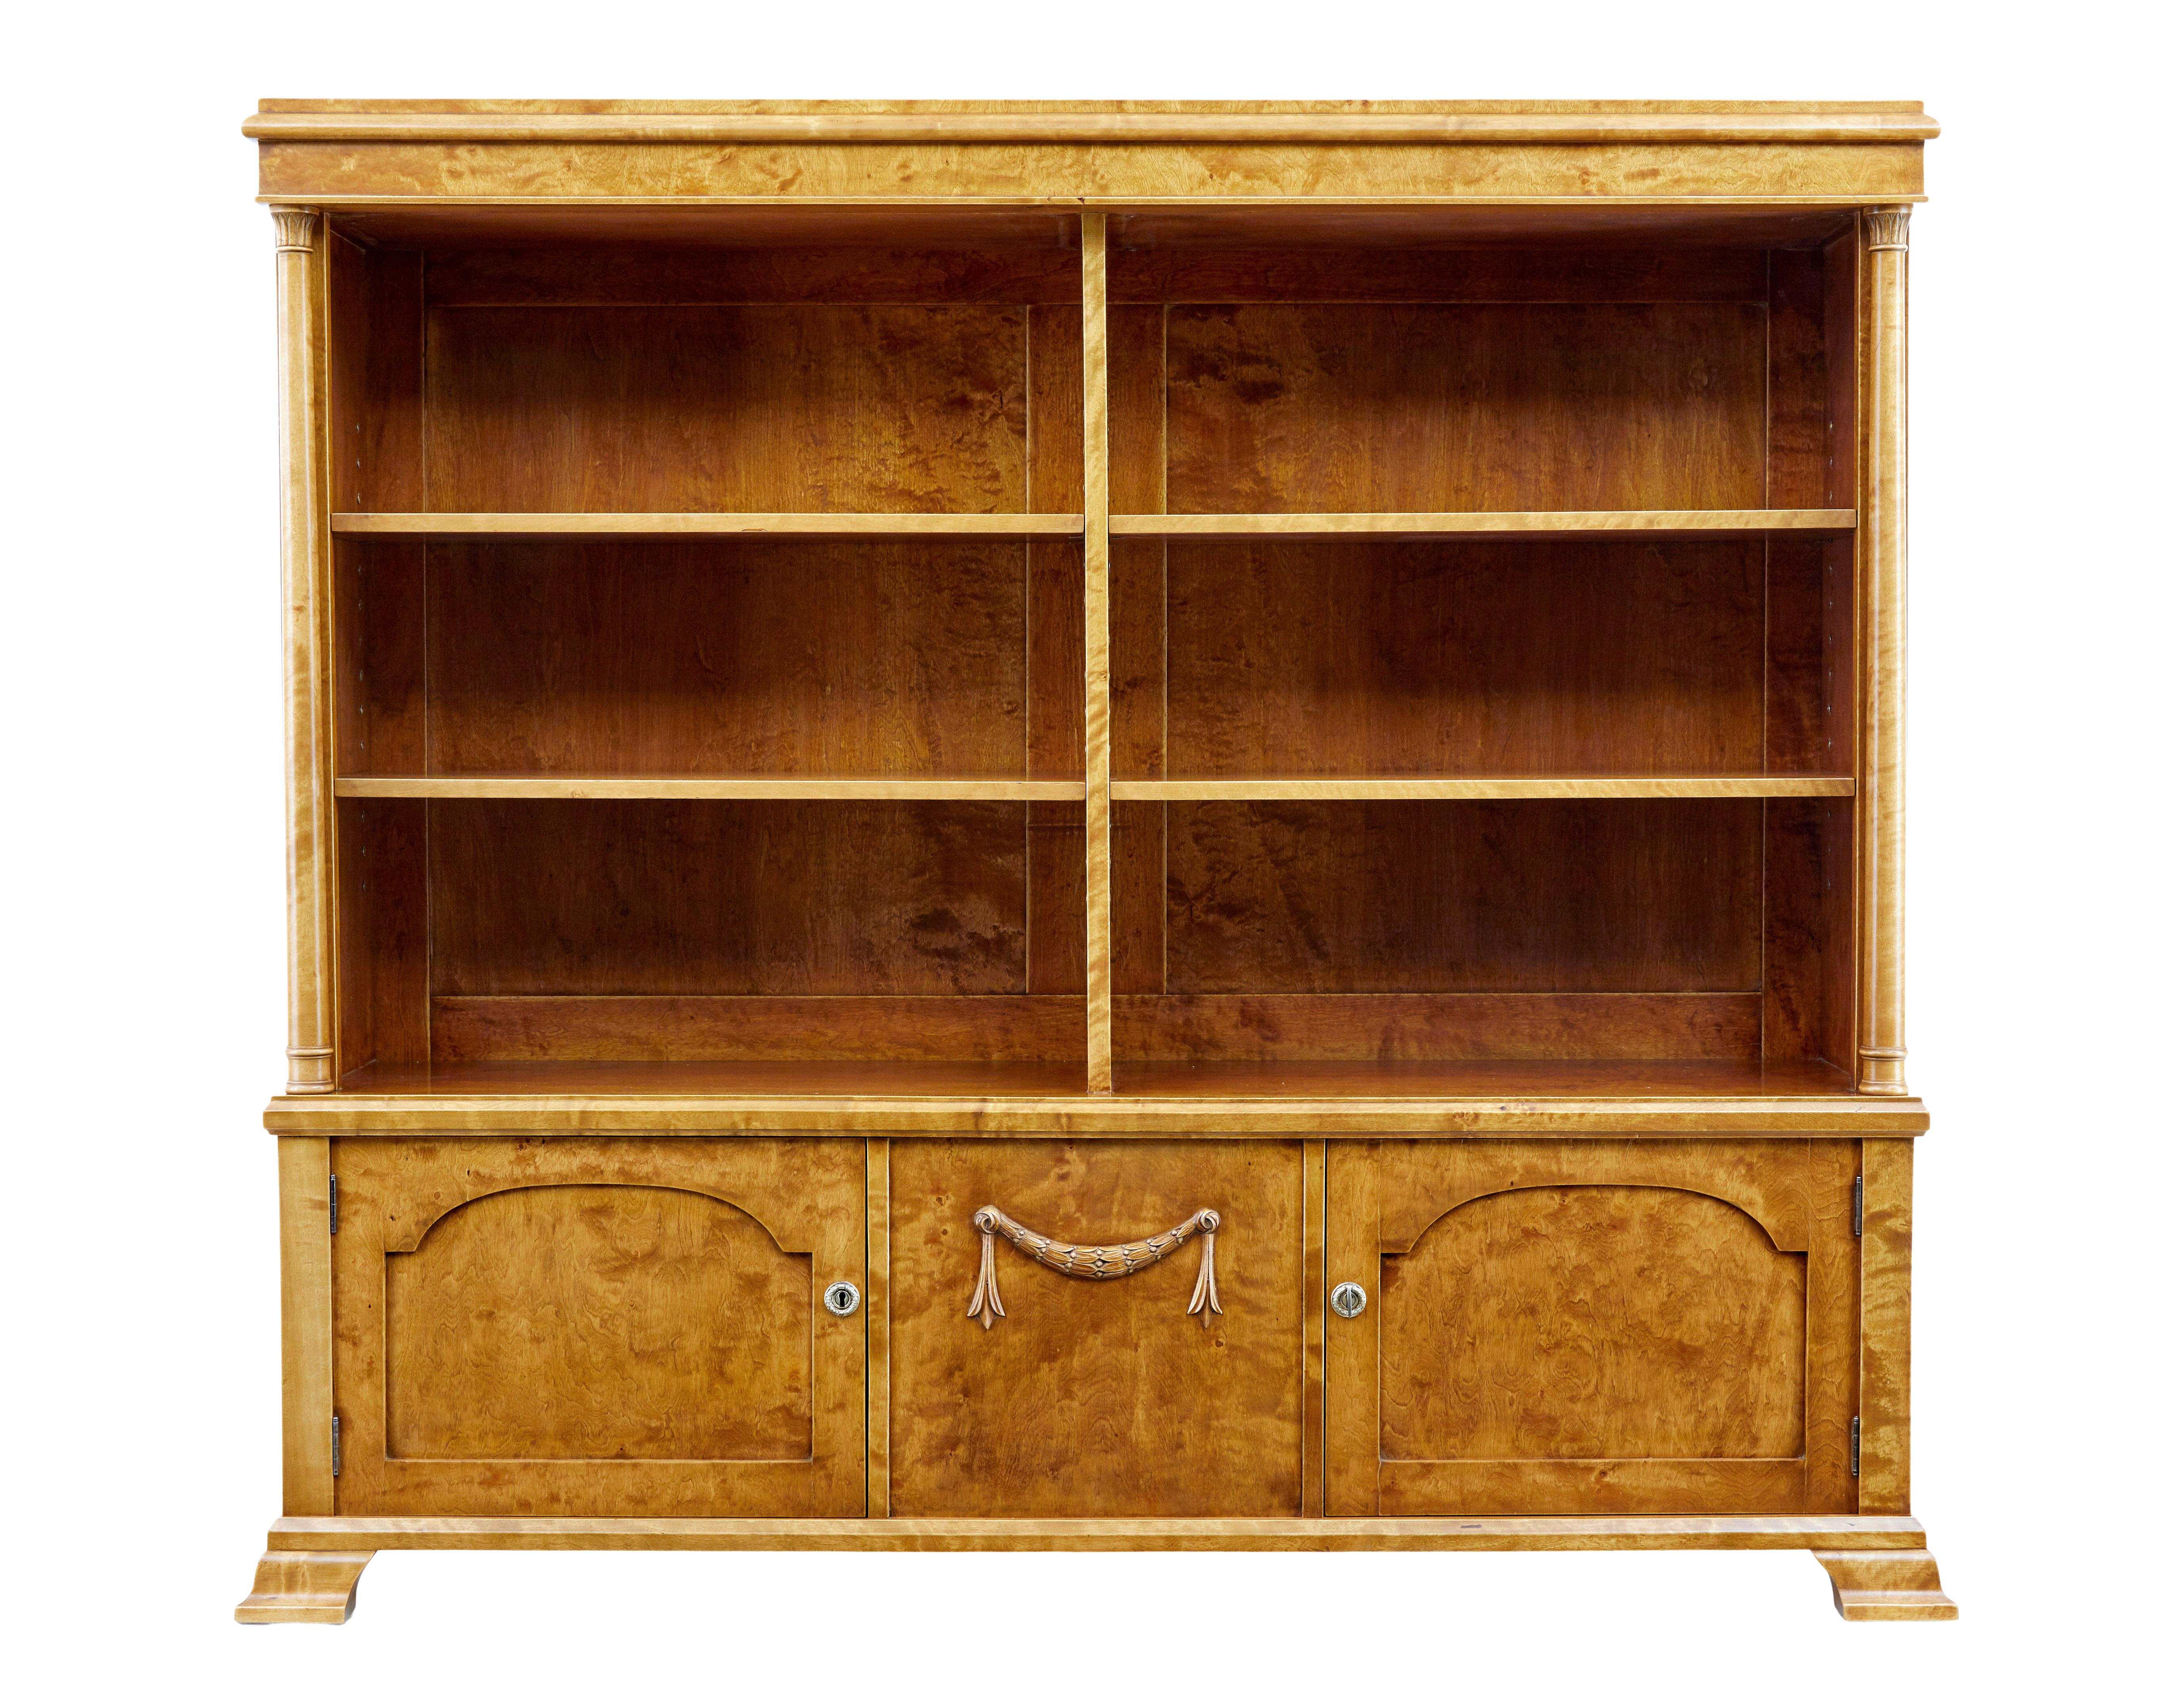 Beautiful rich birch open bookcase, circa 1910.

Four adjustable shelves with a central partition, below a central panel with carved applied swag, flanked either side a single door cupboard.

Turned columns run up both front sides and link to the